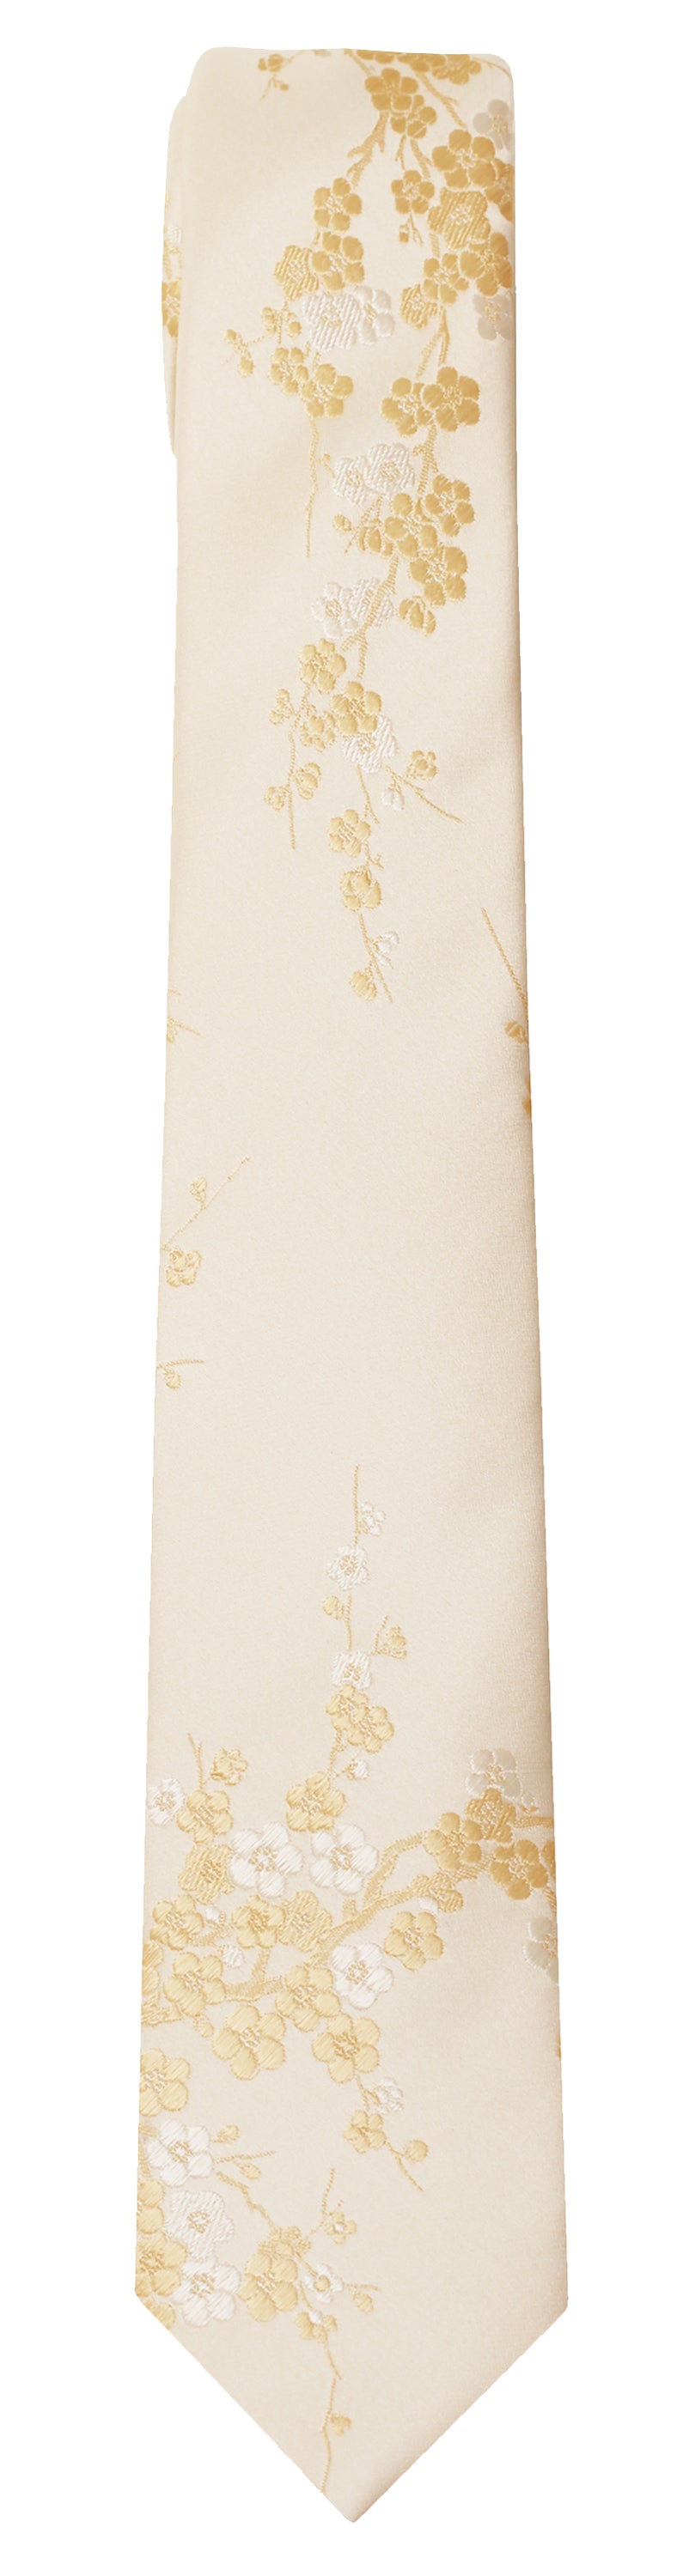 Mimi Fong Cherry Blossom Tie in White & Gold